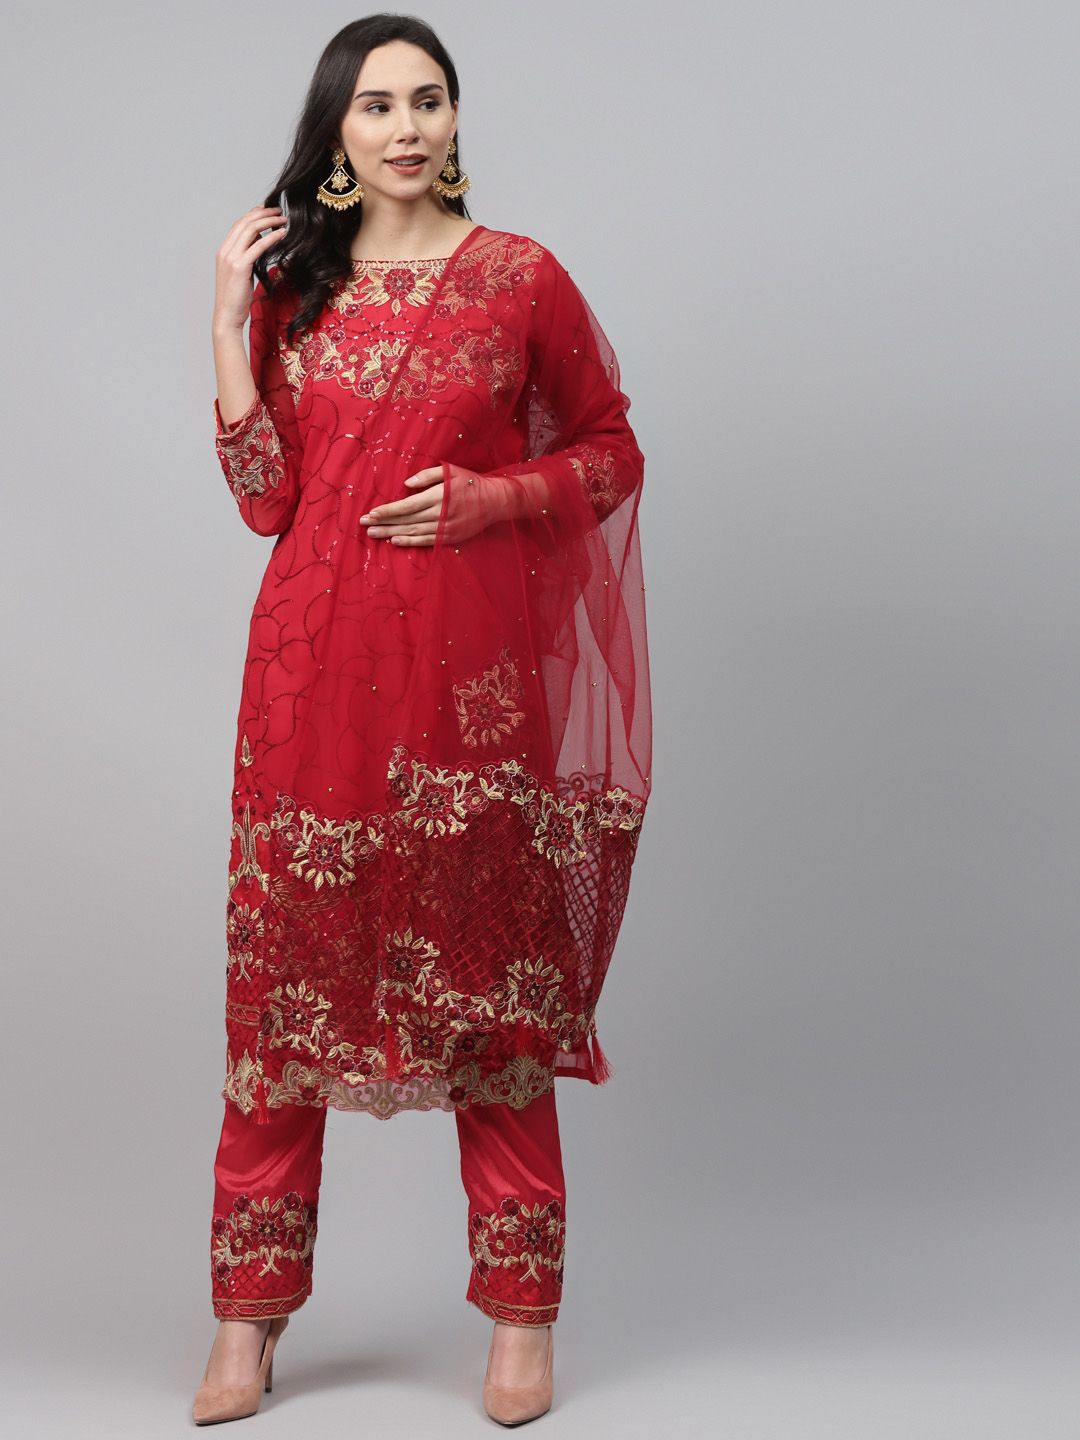 Readiprint Fashions Red & Golden Sequinned Semi-Stitched Dress Material Price in India